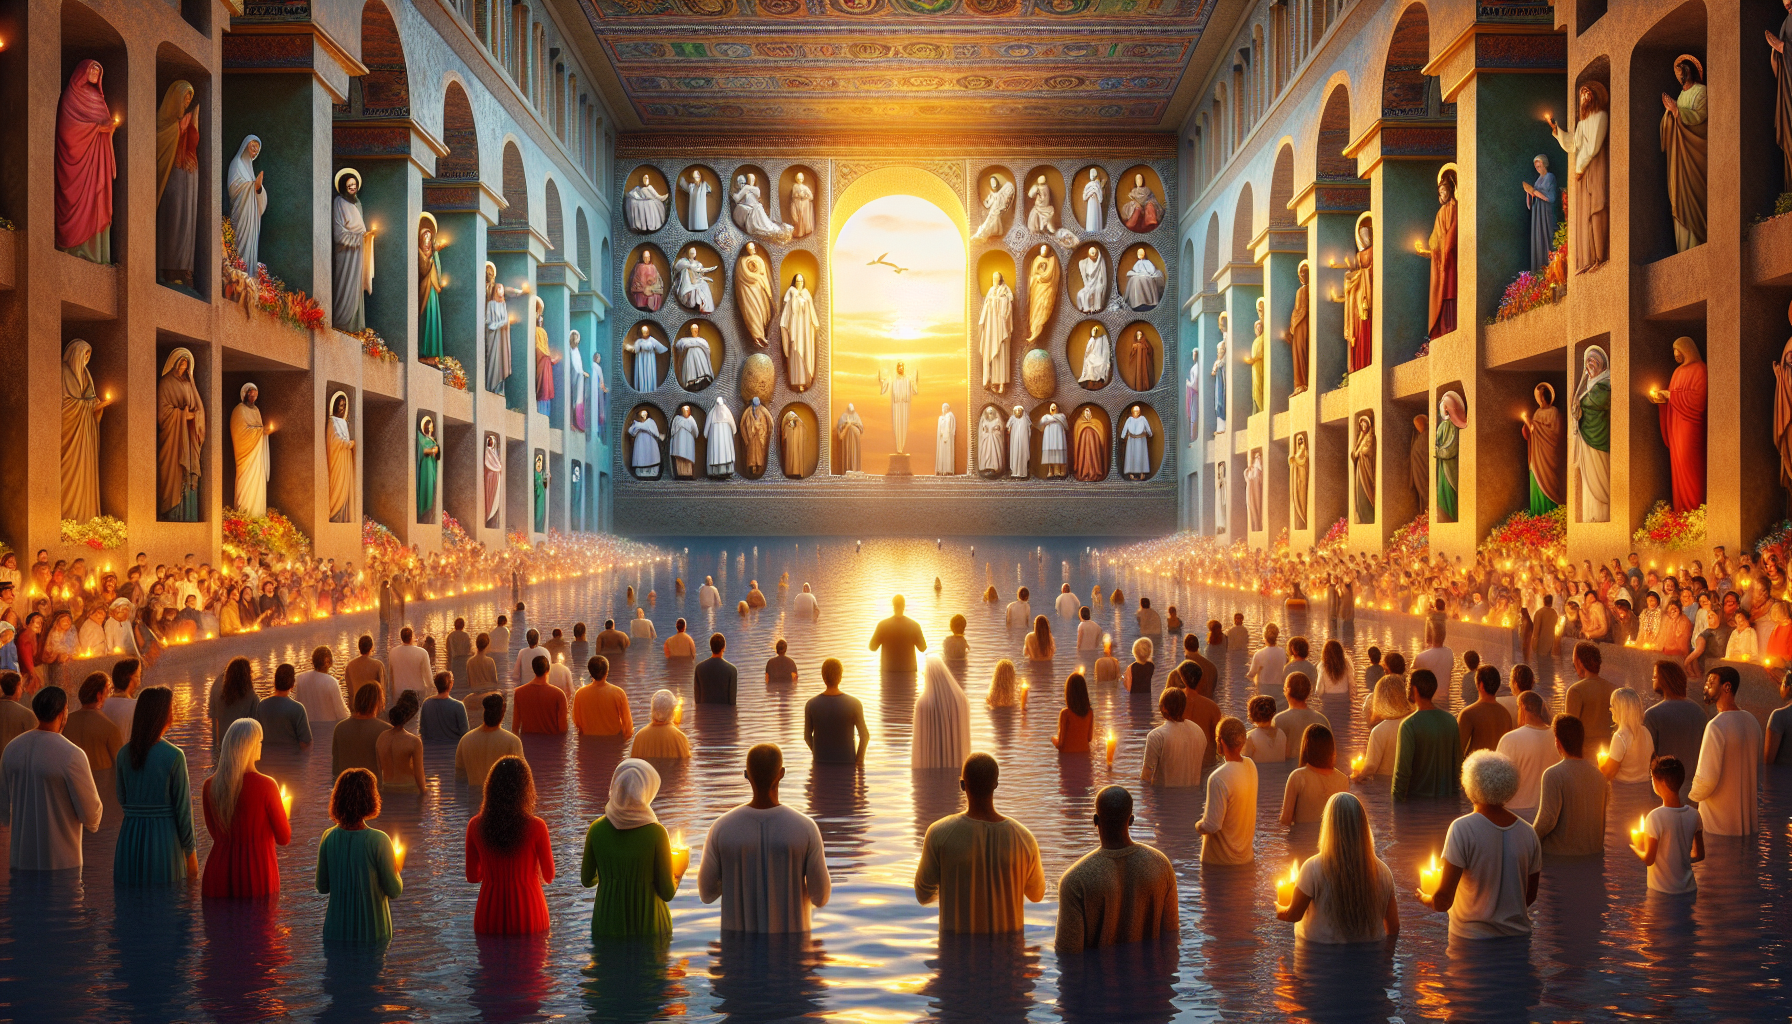 Serene digital artwork of a gathering at the Sunken Cathedral of Buenos Aires, depicting the diverse array of Argentine saints as they hover ethereally above a crowd of devoted worshippers, bathed in the golden glow of a setting sun, while the faithful carry candles and flowers, showing cultural elements typical of Argentina.